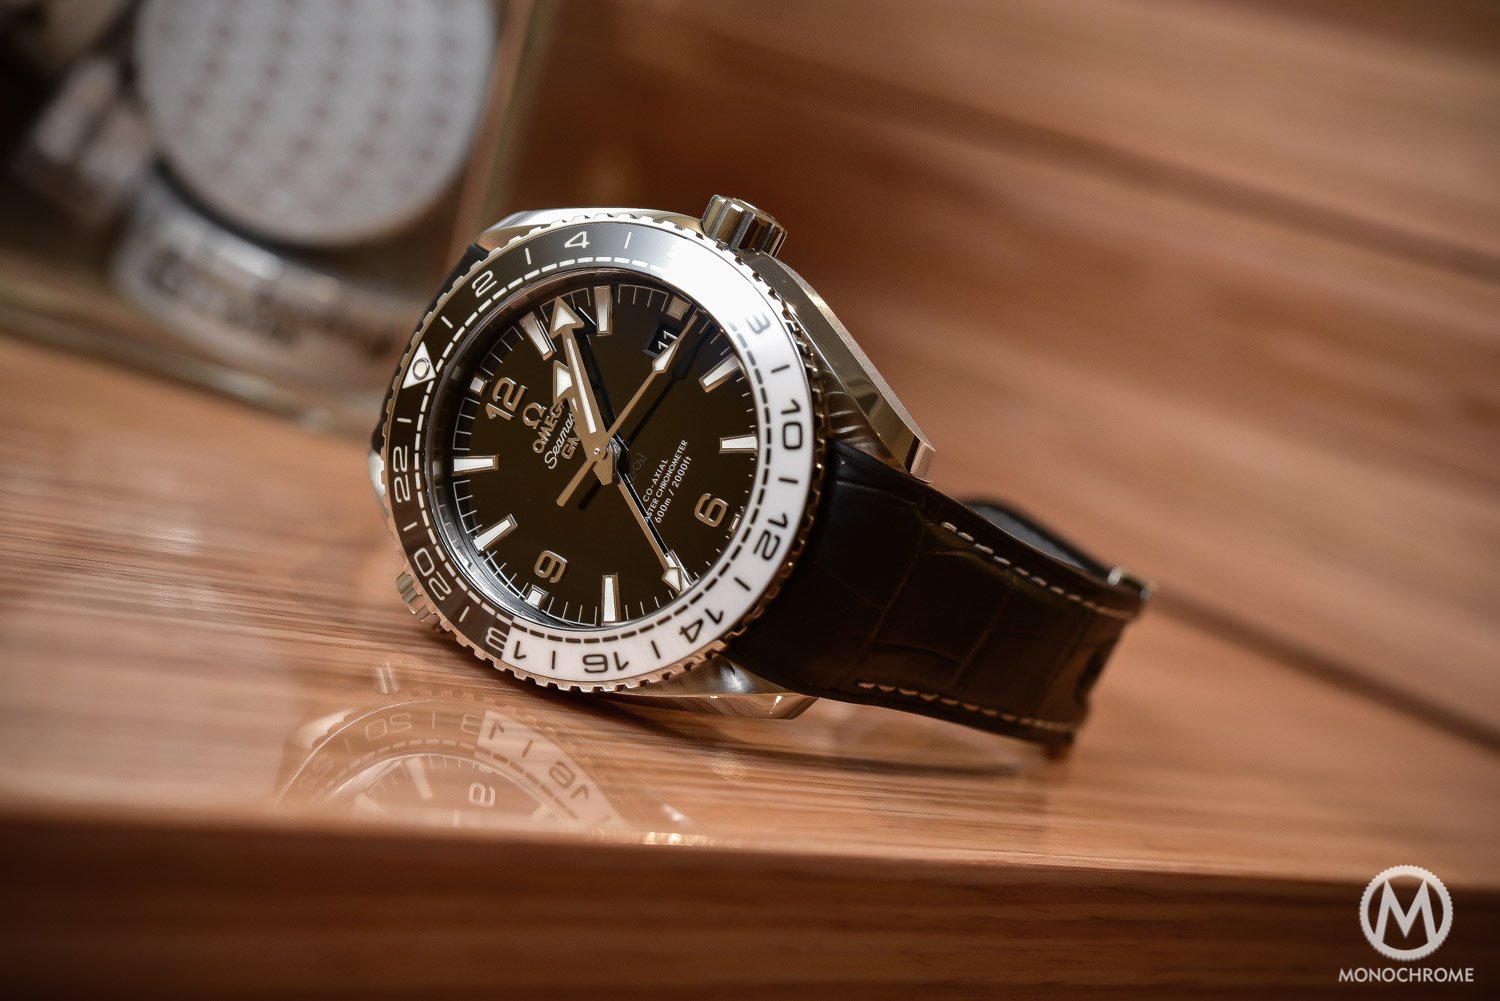 Relativamente vencimiento sacudir Introducing the new Omega Seamaster Planet Ocean GMT with Master  Chronometer movement - Live photos, specs and price - Monochrome Watches